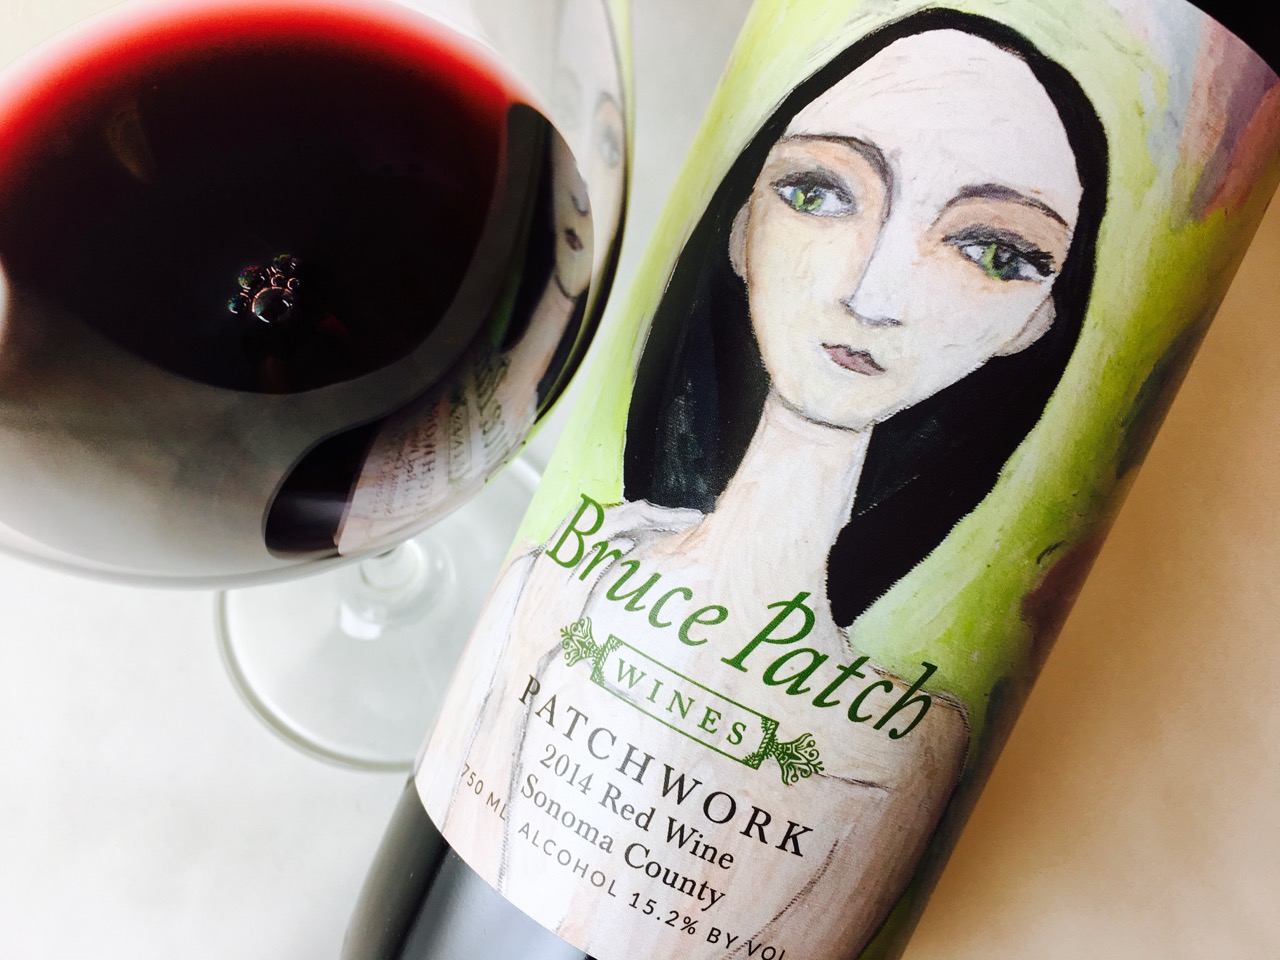 2014 Bruce Patch Wines Red Blend Patchwork Sonoma County